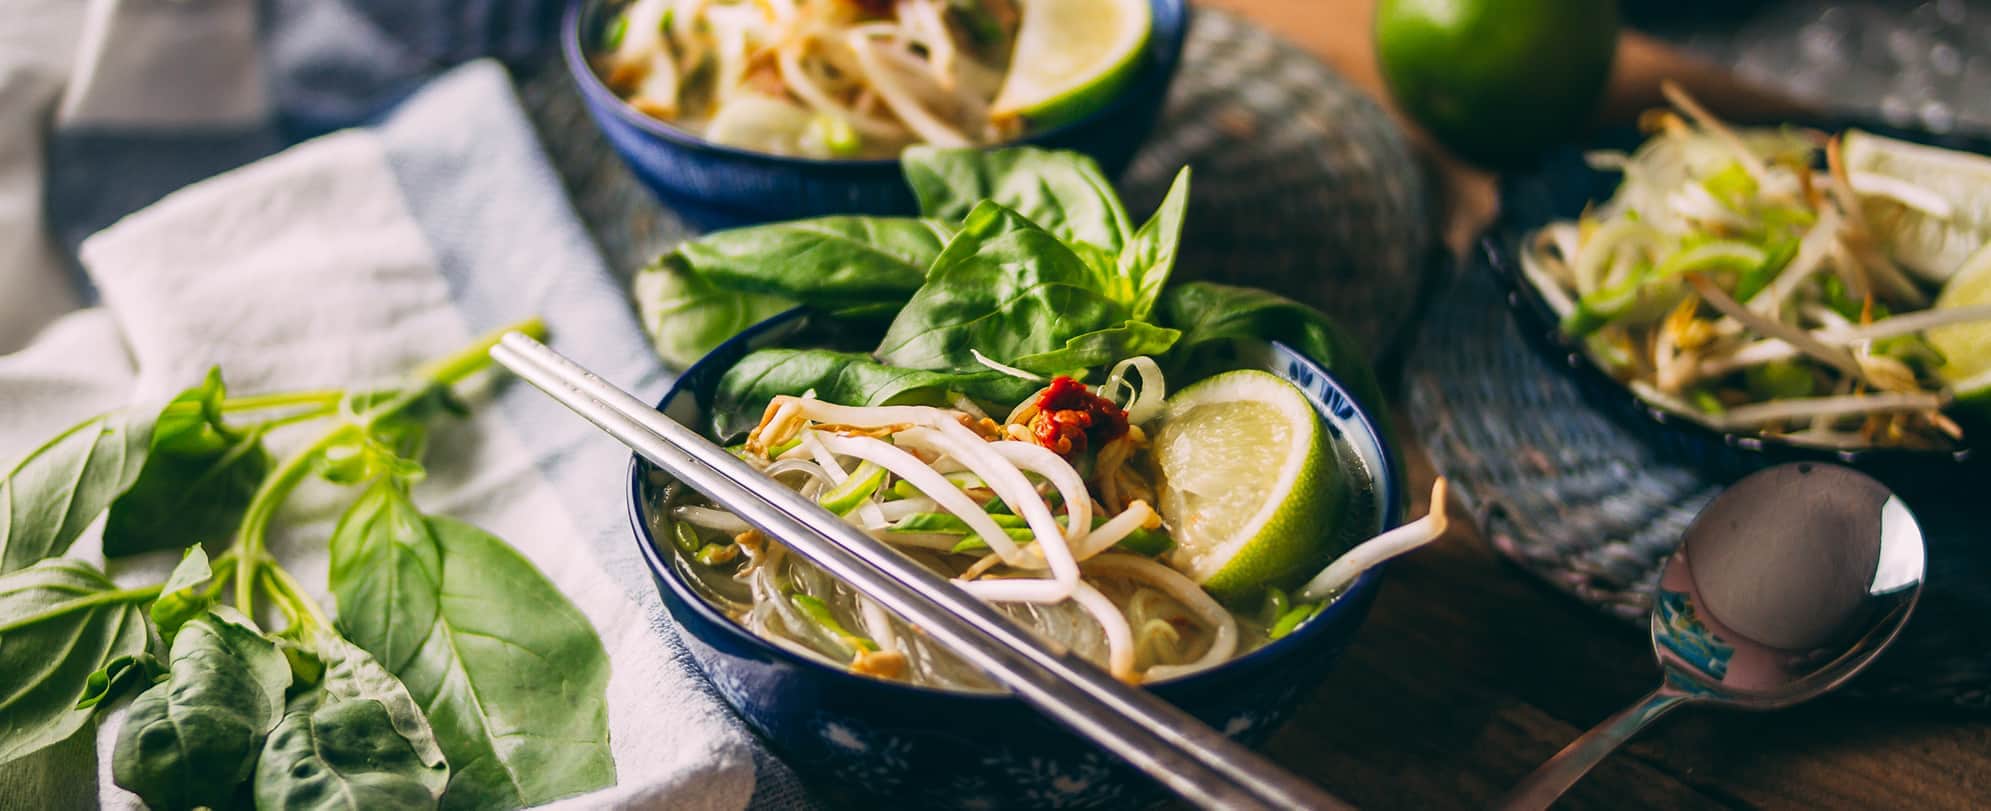 A bowl of Vietnamese Pho noodles with chopsticks from the Little Saigon neighborhood in Westminster, California